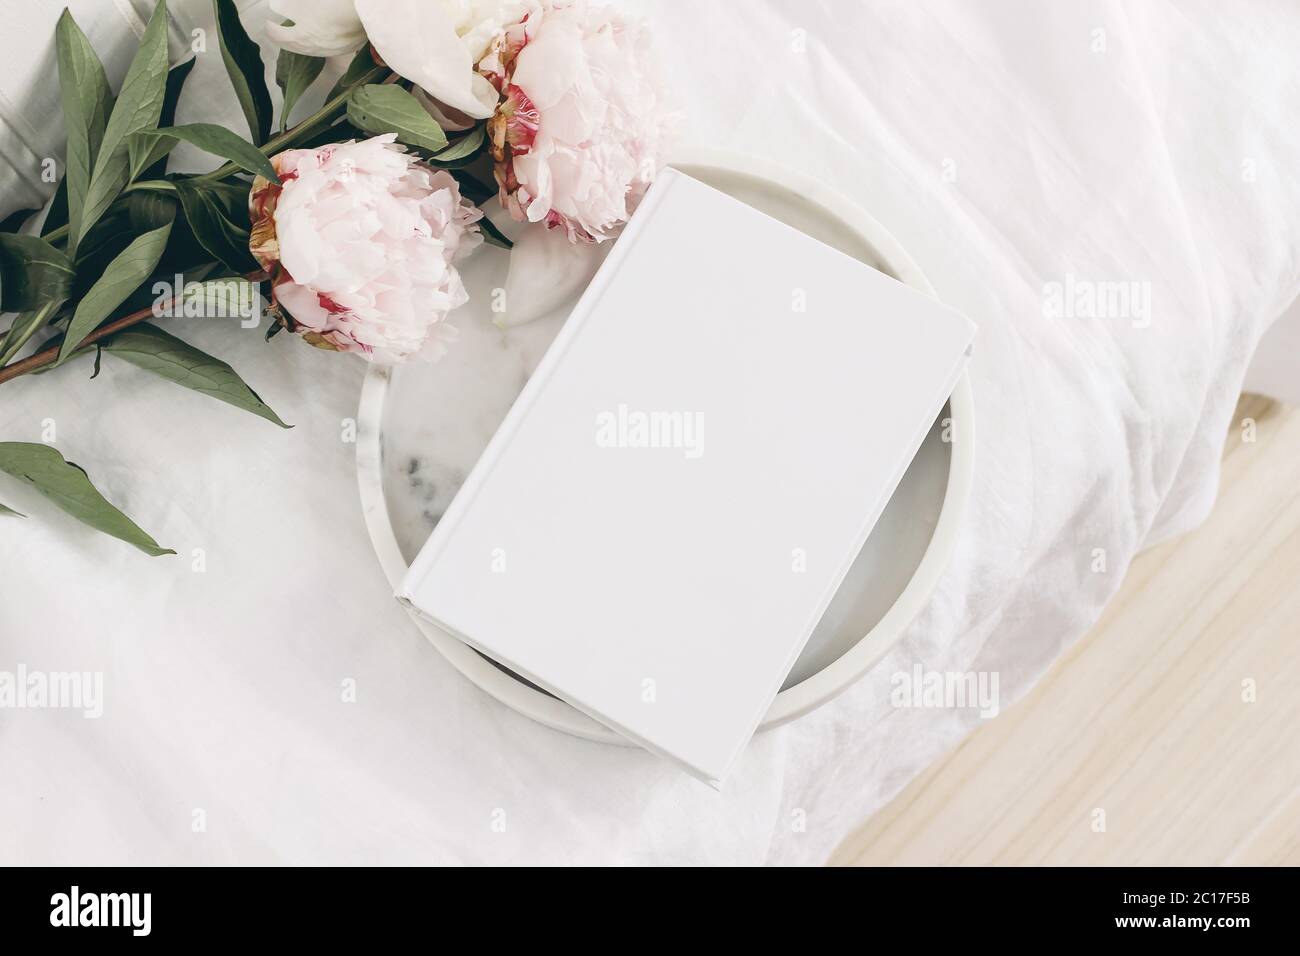 Wedding still life scene. White empty book cover mockup on marble tray. Pink peony flowers on white linen table cloth. Vintage feminine styled photo Stock Photo